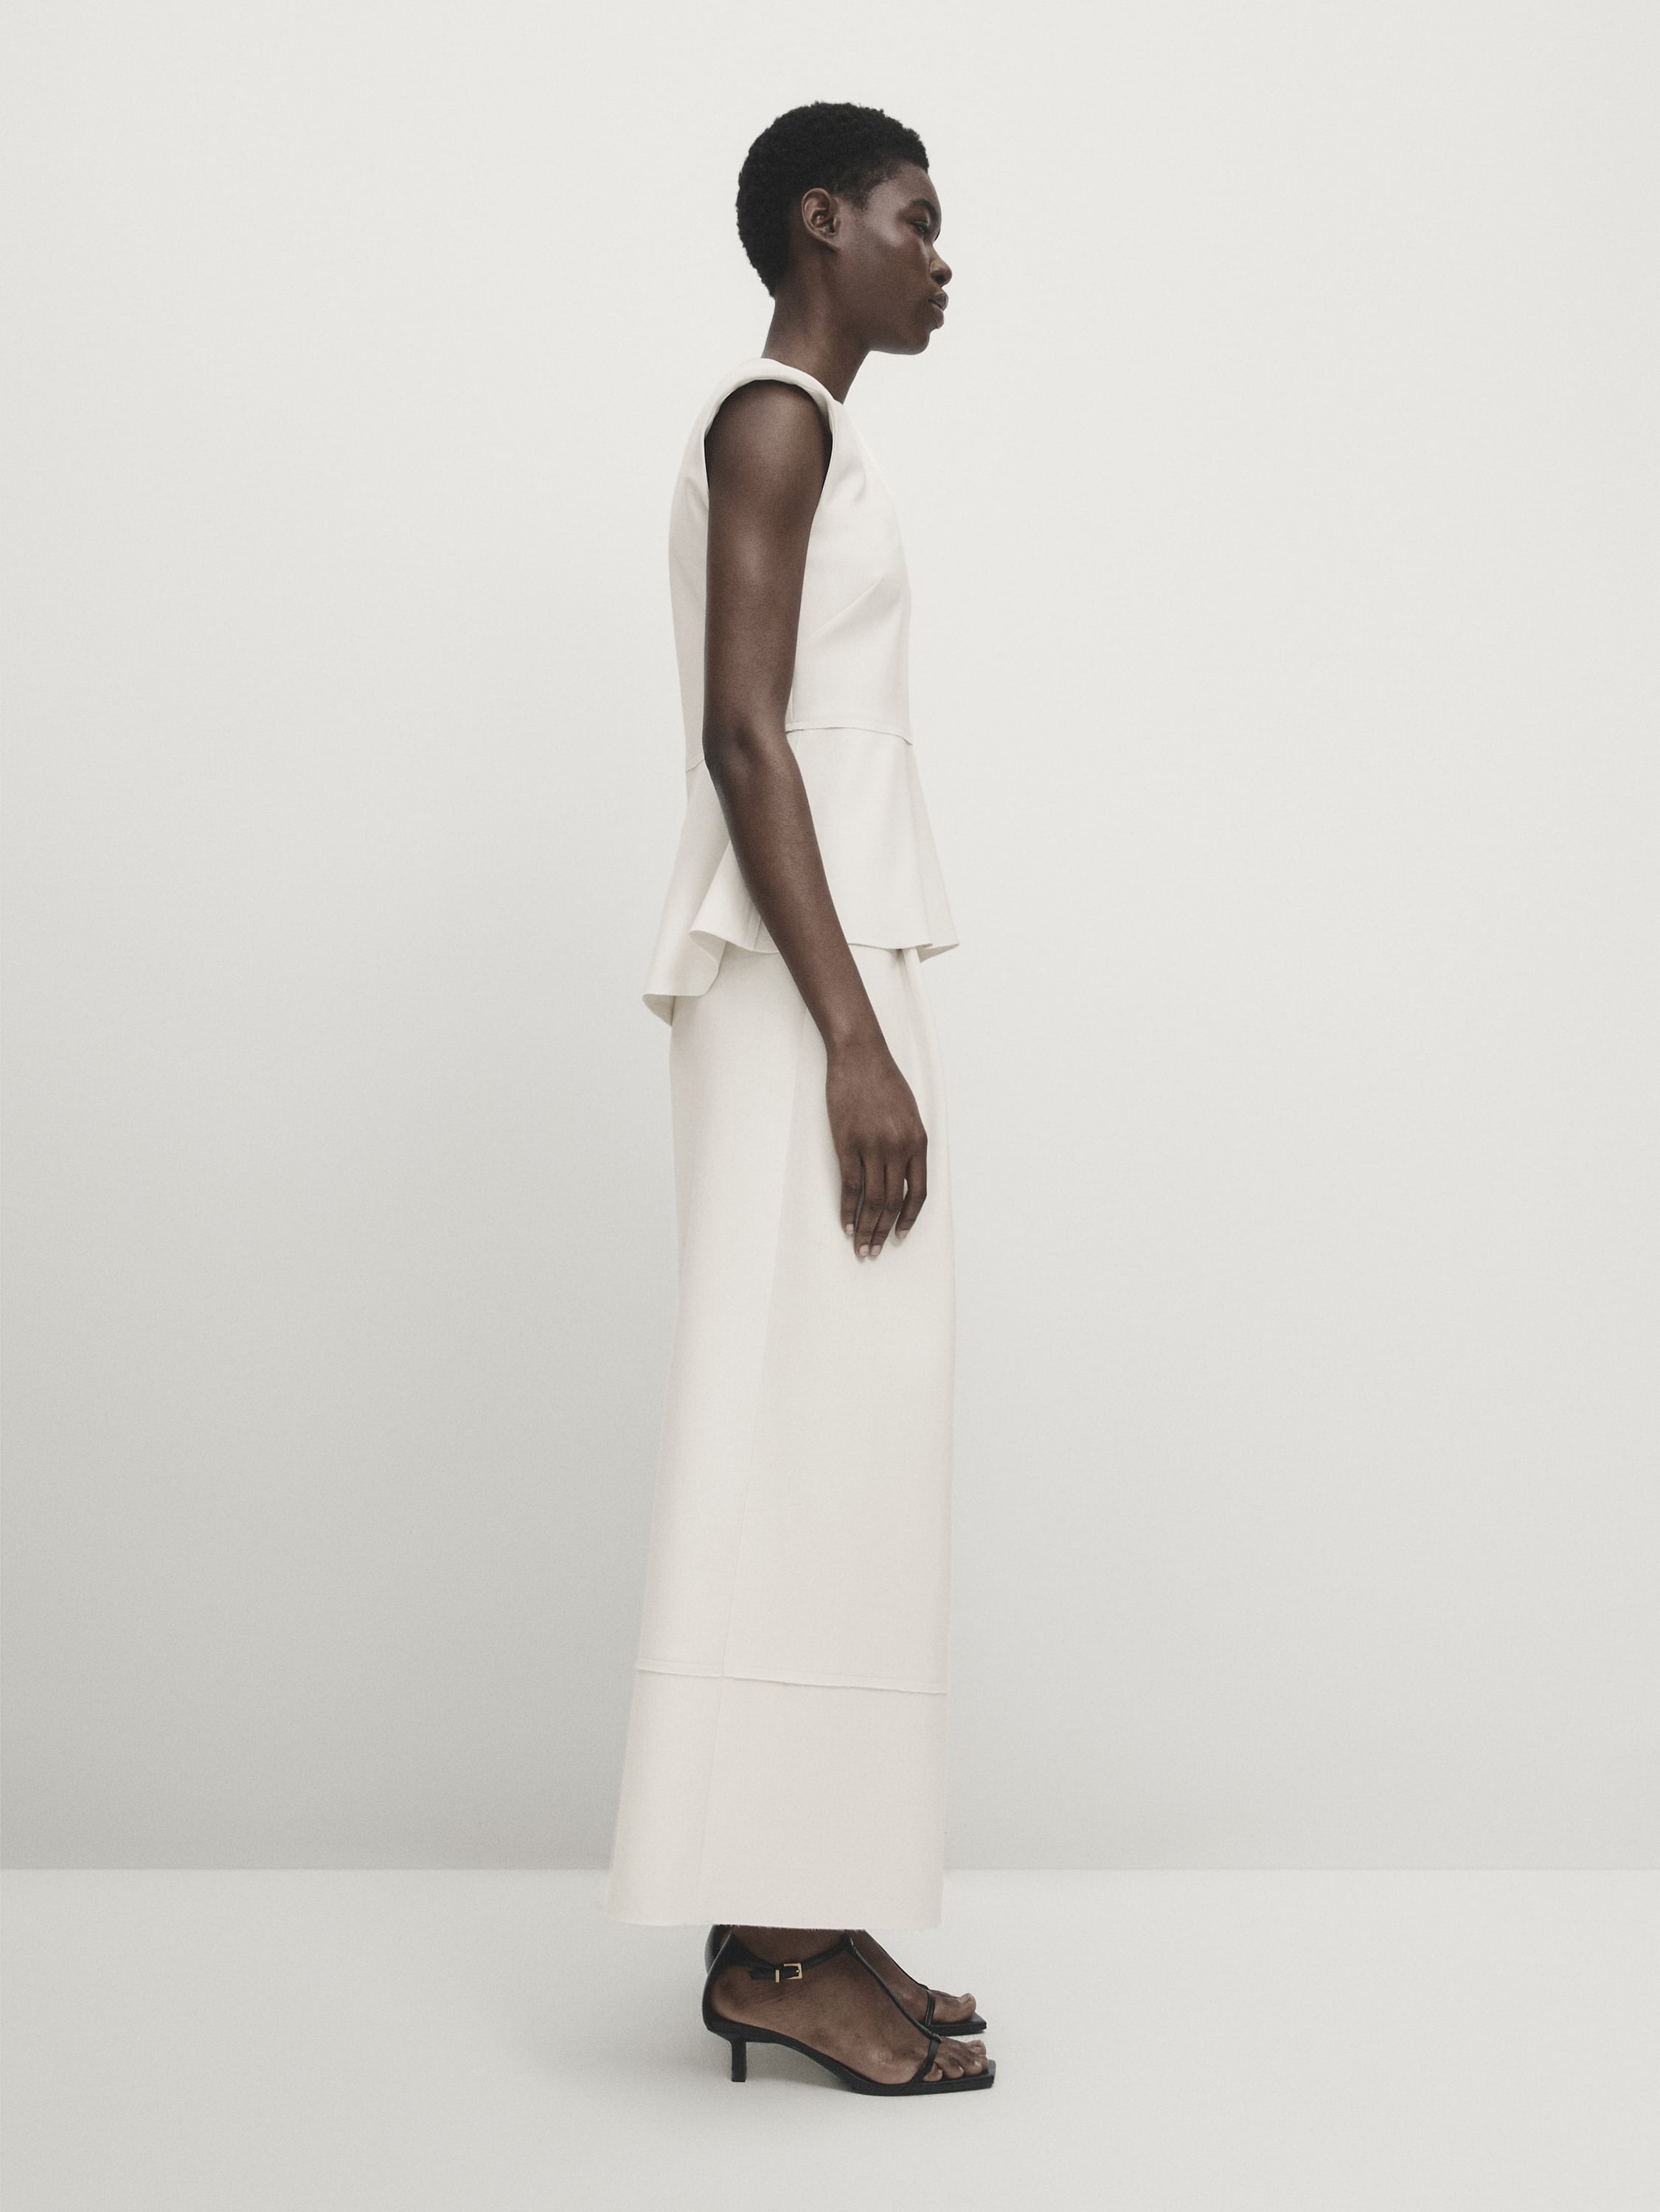 Wide-leg trousers with darts and hem seam detail - Studio